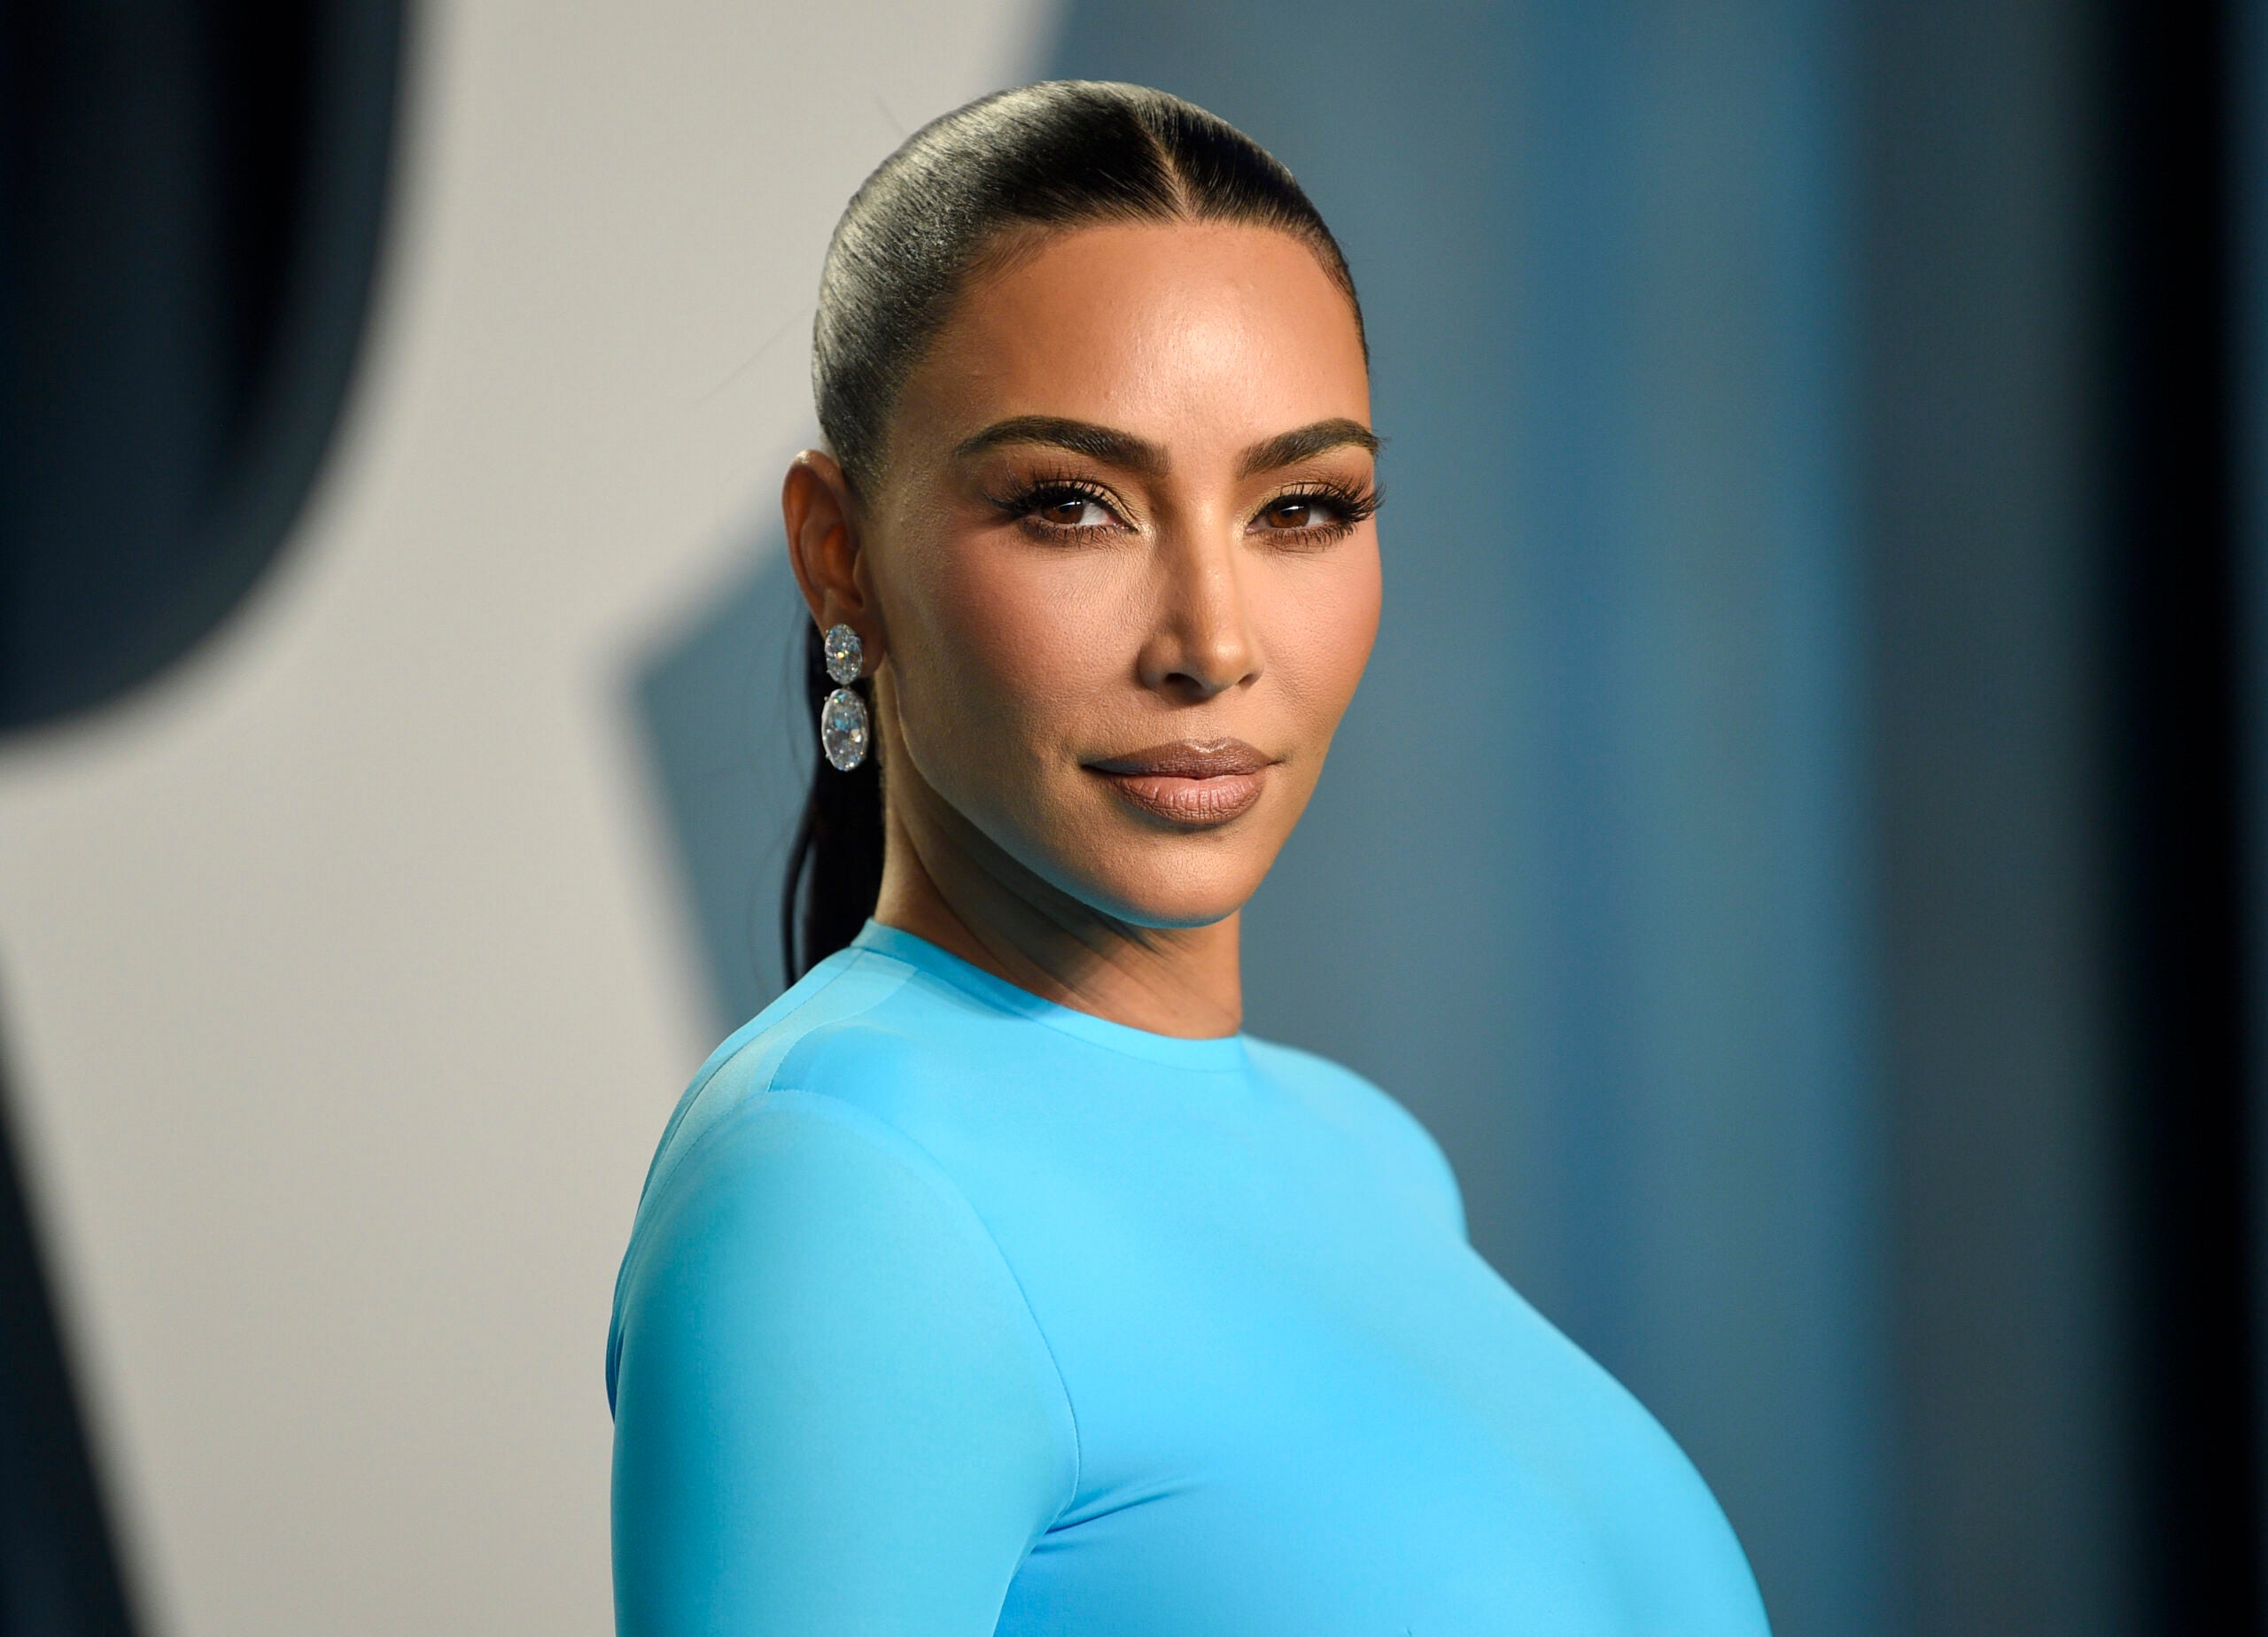 FILE - Kim Kardashian appears at the Vanity Fair Oscar Party in Beverly Hills, Calif., on March 27, 2022. Kim Kardashian testified Tuesday, April 26, 2022, that she had no memory of making any attempt to kill the reality show that starred her brother Rob Kardashian and his fiancée Blac Chyna. (Photo by Evan Agostini/Invision/AP, File)